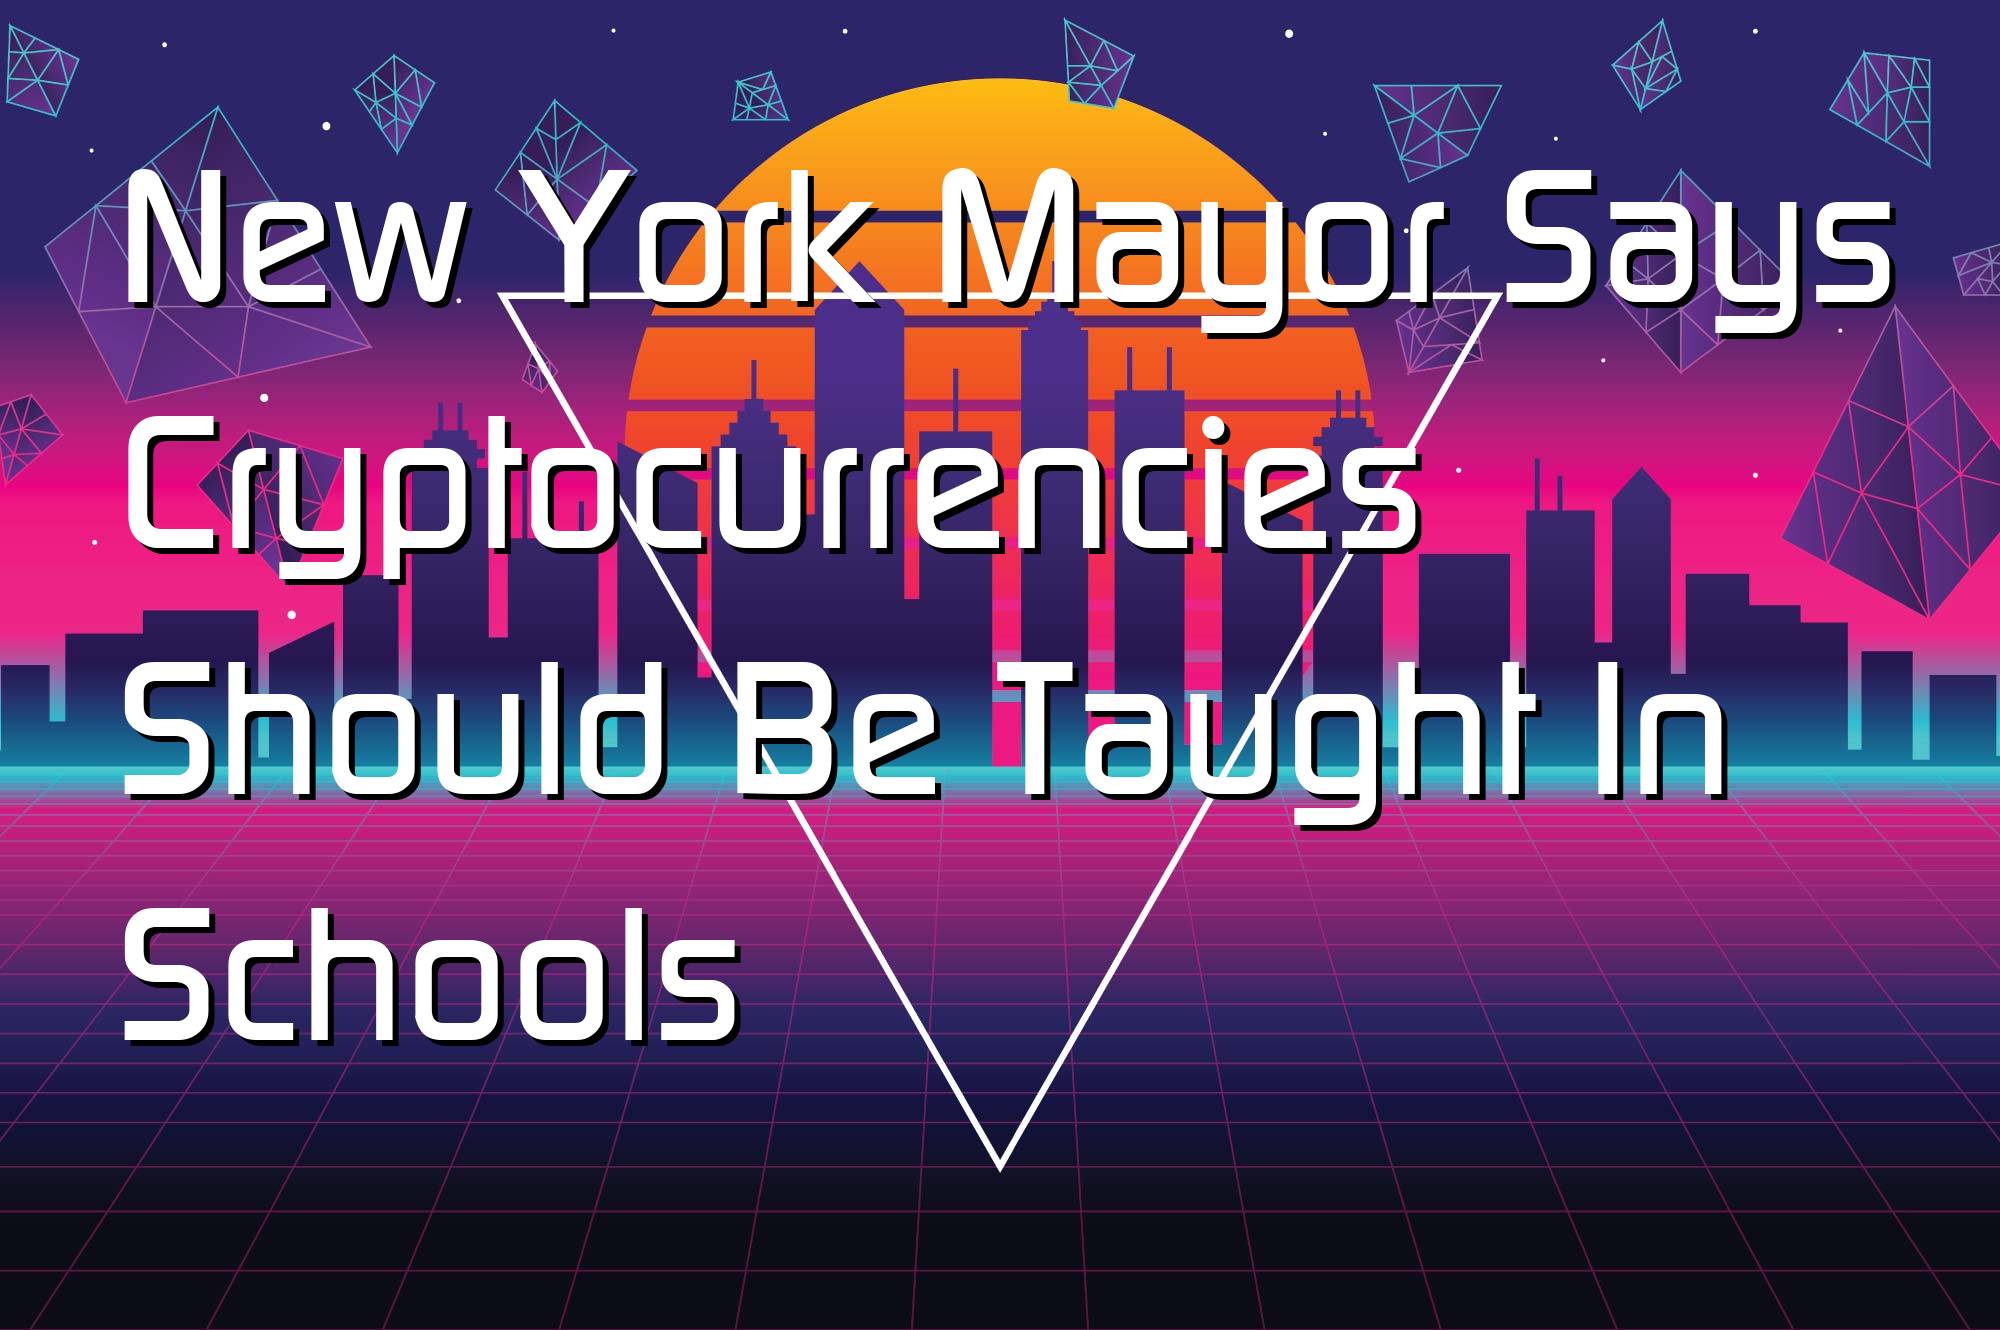 @$67513: New York Mayor Says Cryptocurrencies Should Be Taught In Schools